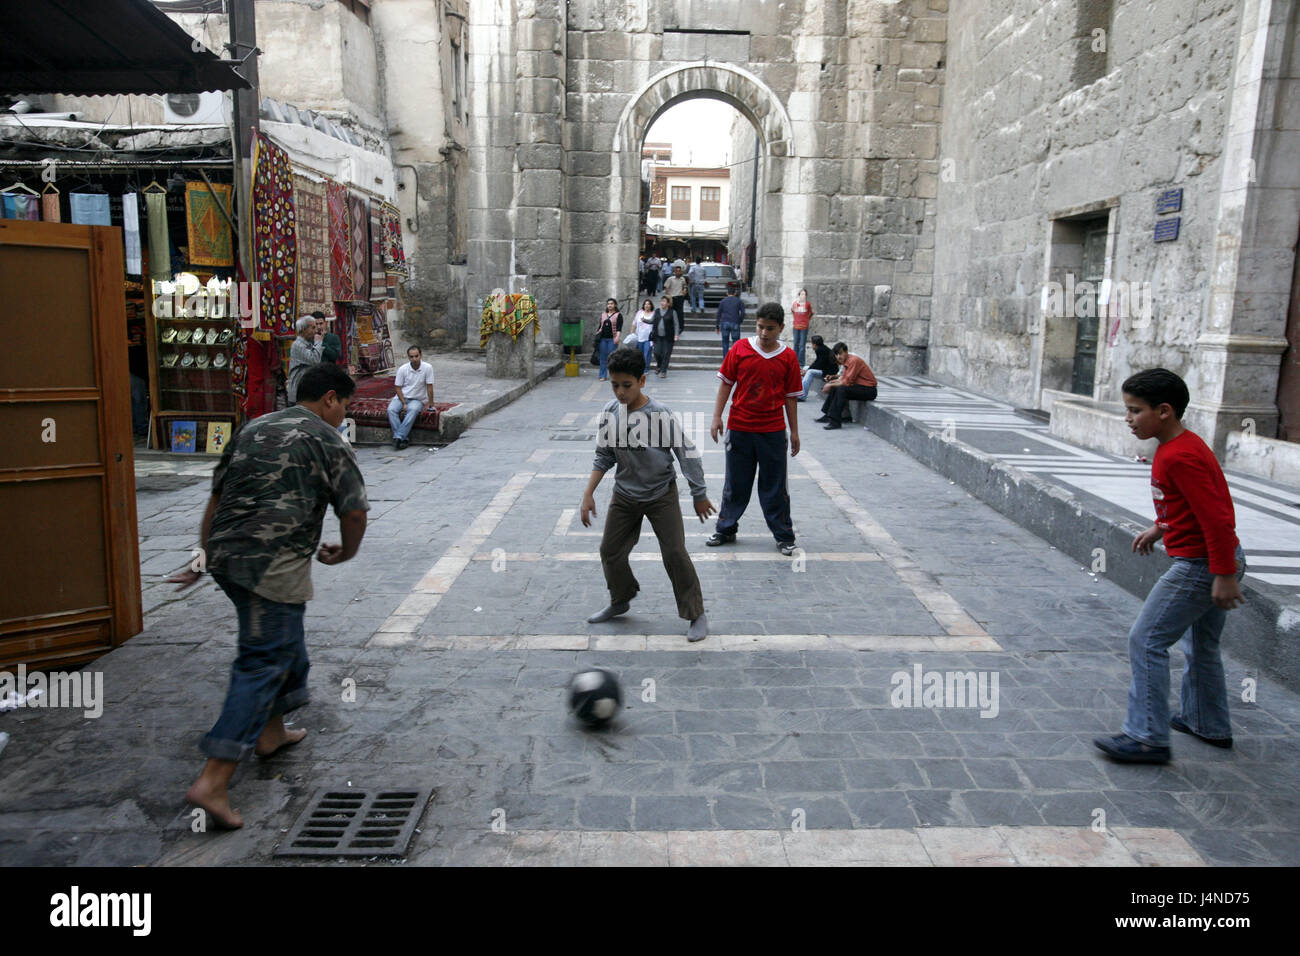 Syria, Damascus, Old Town, Umayyad mosque, lane, children, to football matches, no model release, place of interest, building, structure, architecture, person, outside, football, play, Weihrauchstrasse Stock Photo